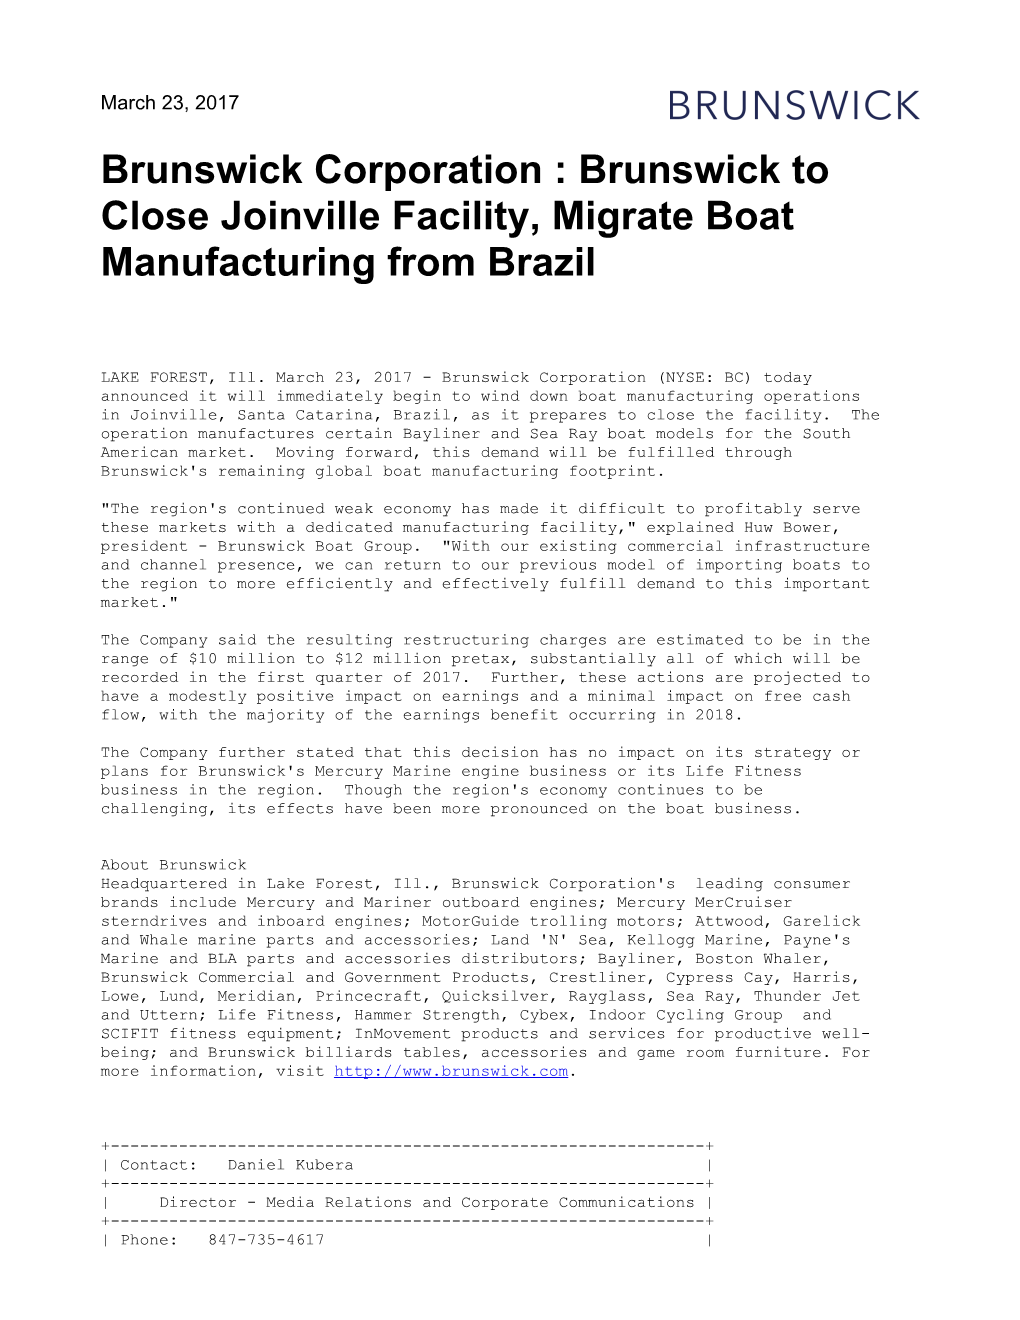 Brunswick Corporation : Brunswick to Close Joinville Facility, Migrate Boat Manufacturing from Brazil